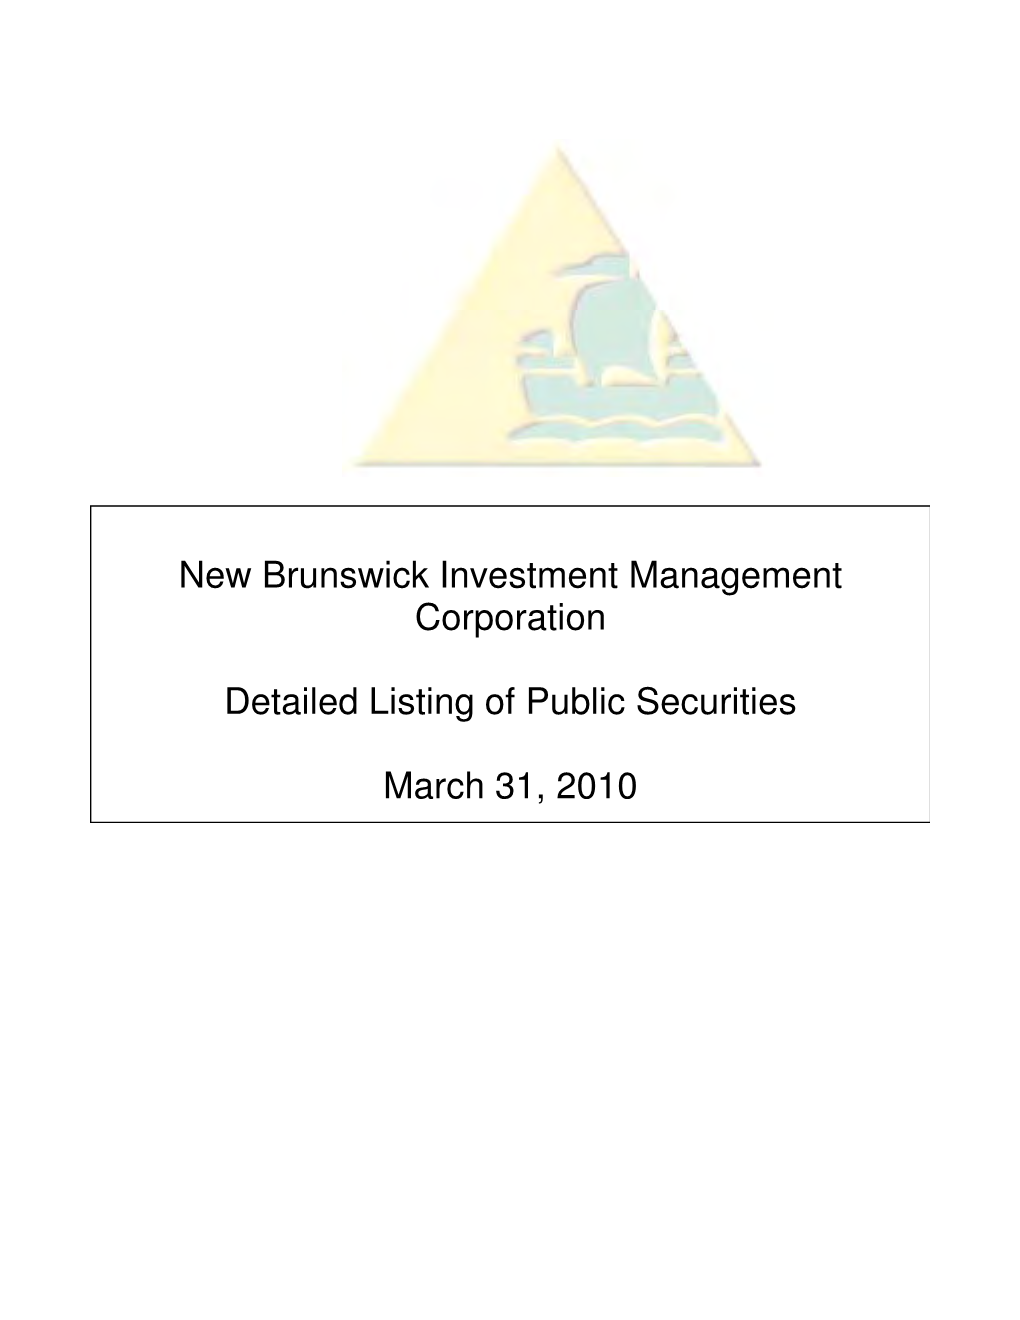 Detailed Listing of Public Securities 2009-2010